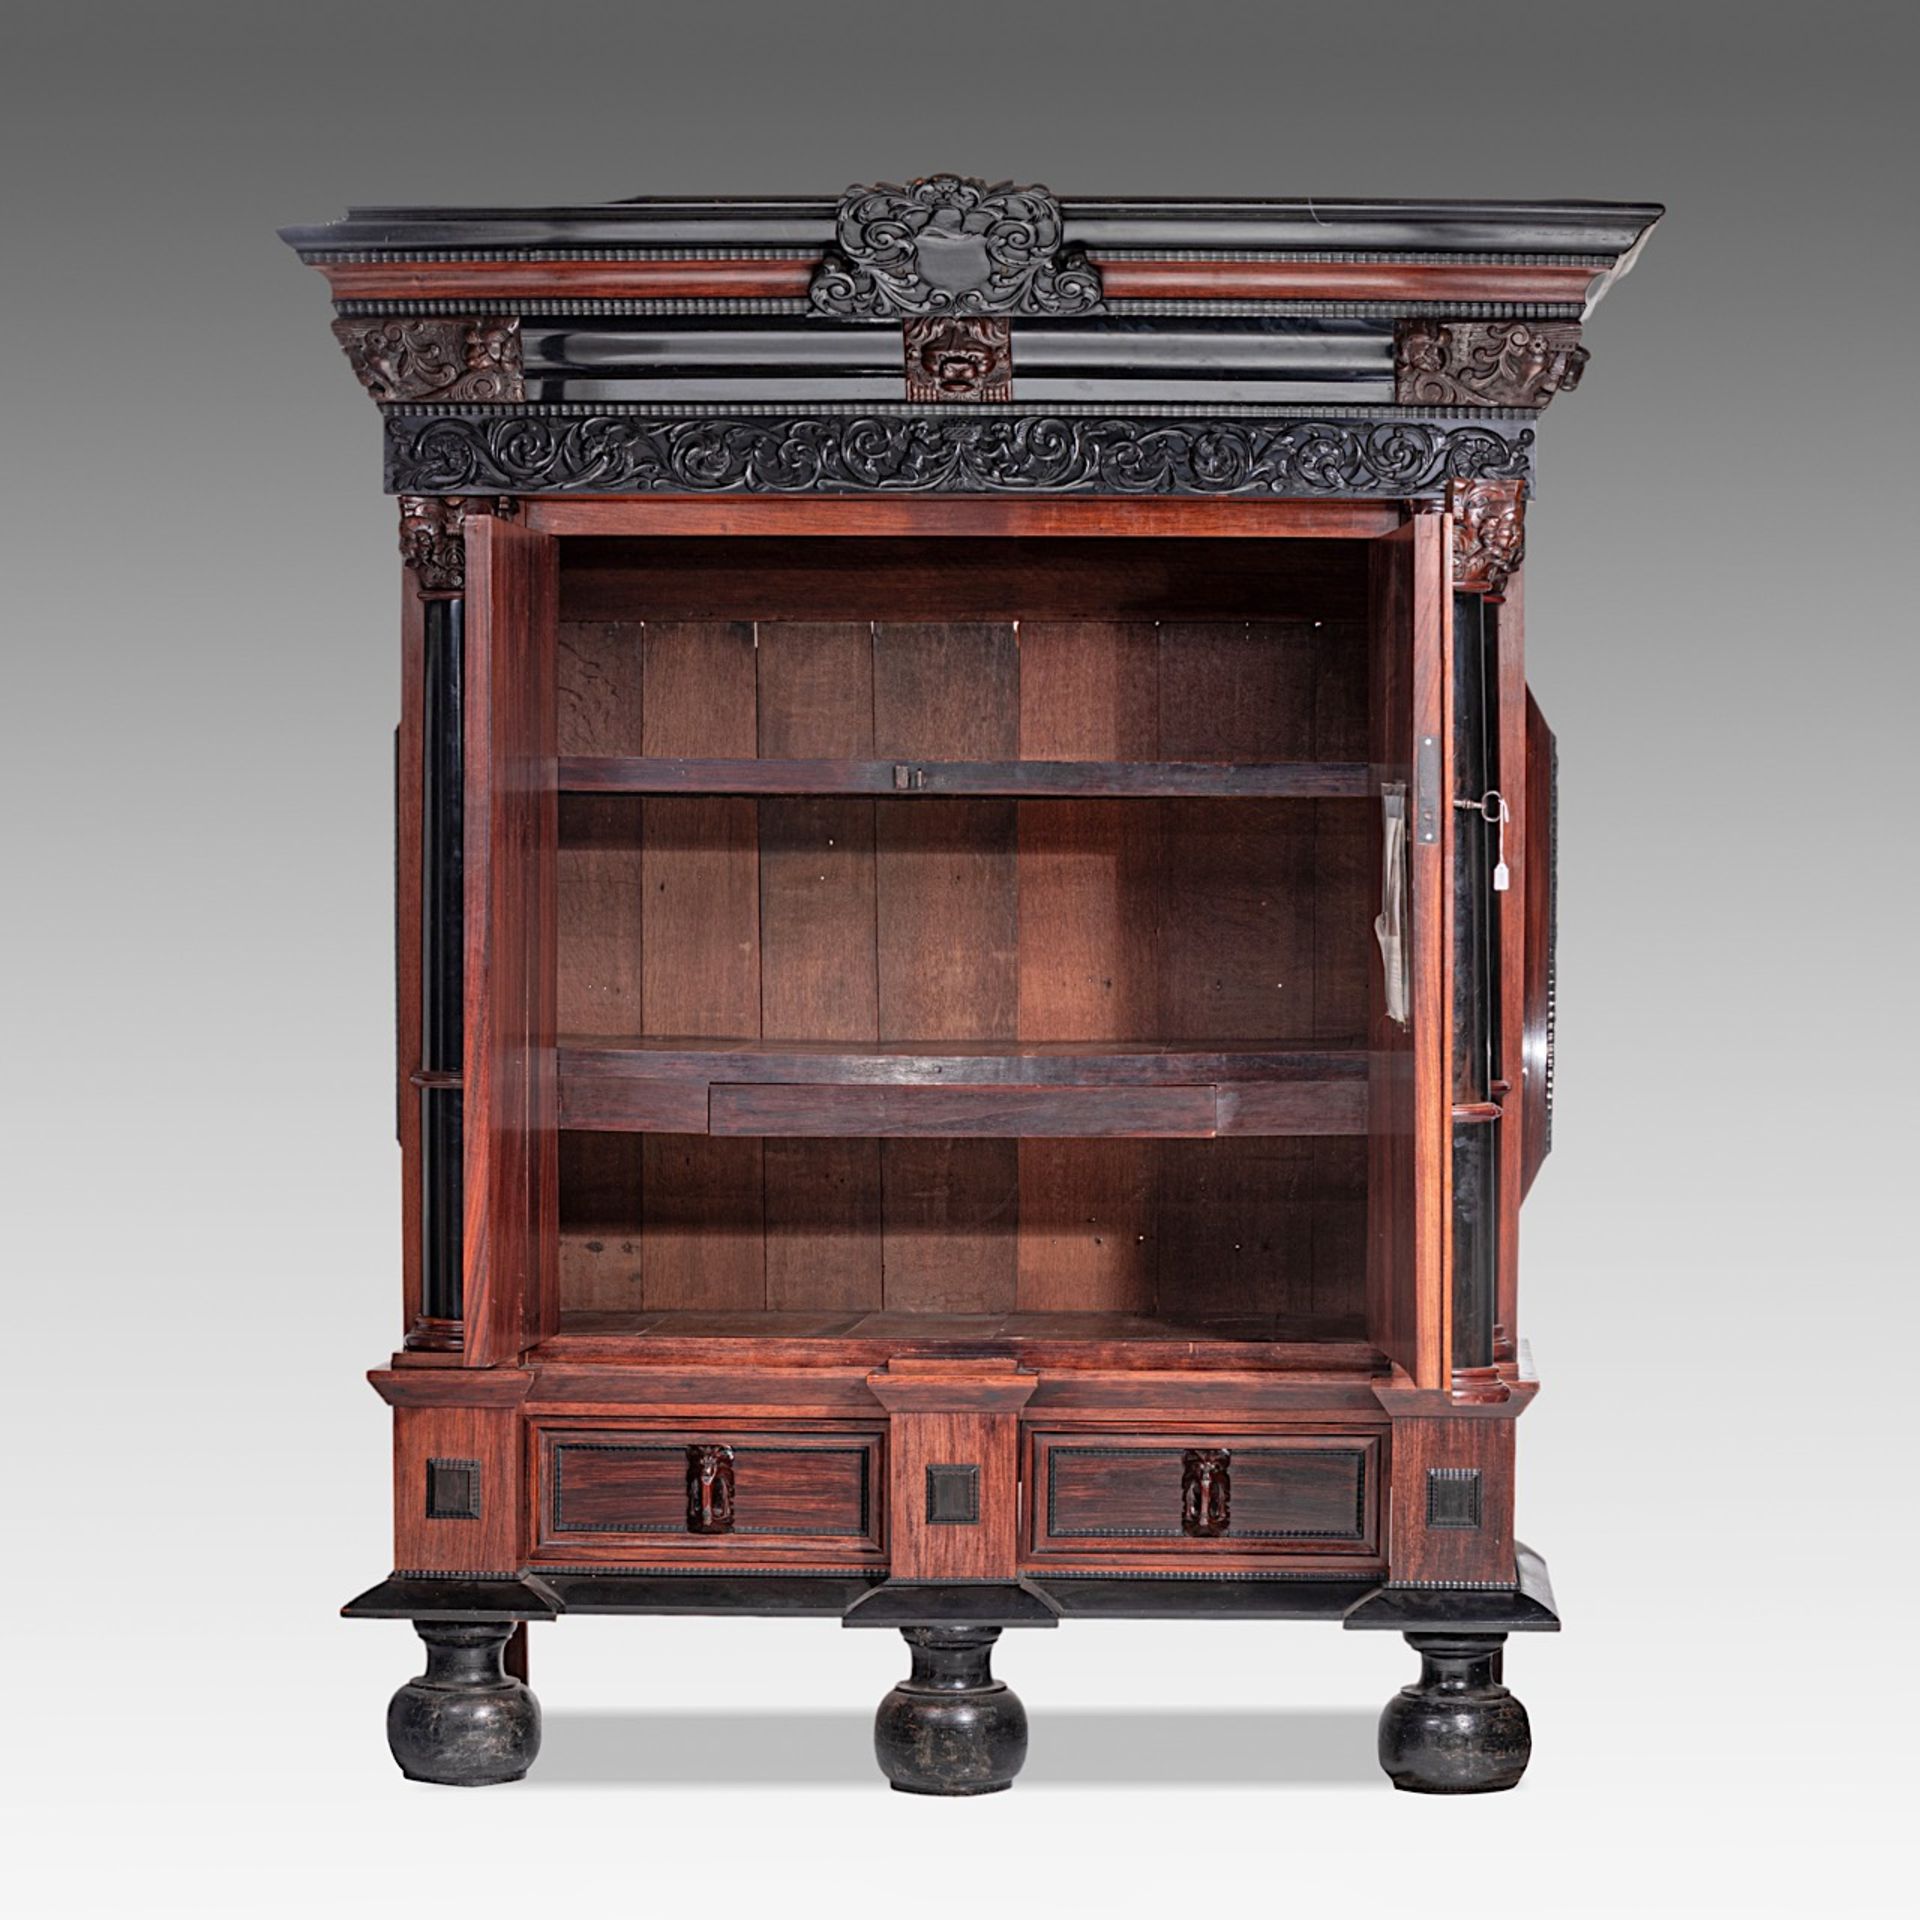 A large Baroque style rosewood and ebony cupboard, H 235 - W 200 - D 85 cm - Bild 6 aus 6